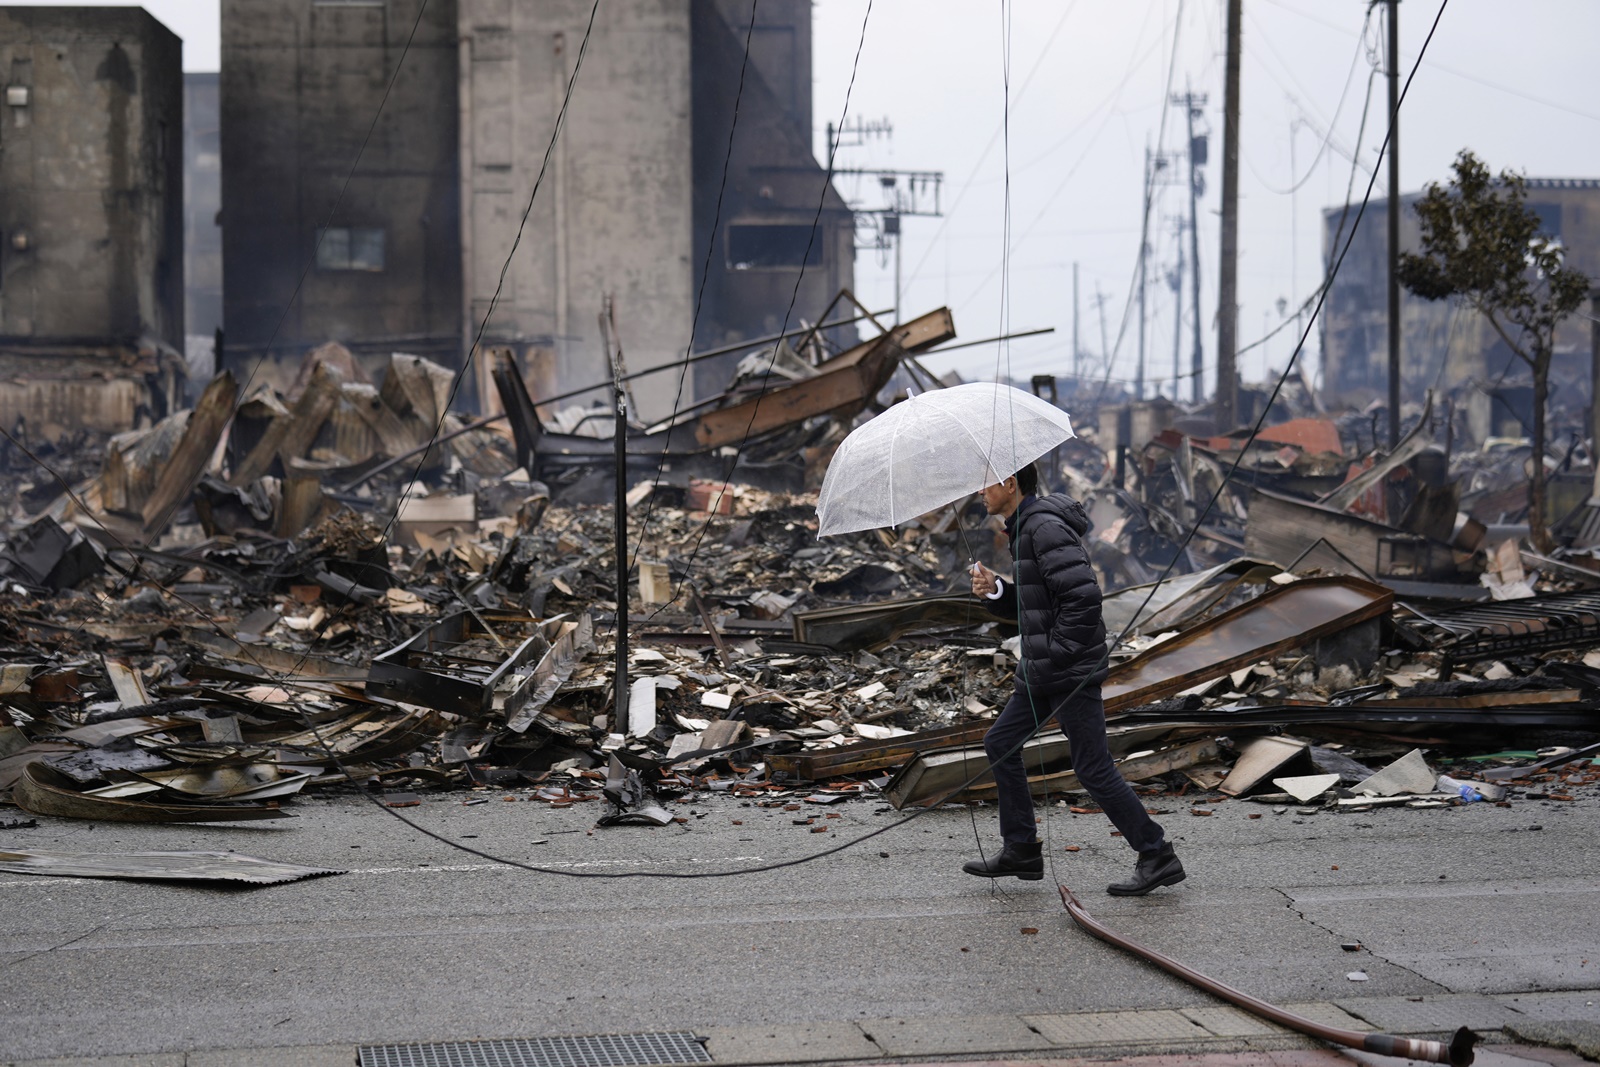 epa11054882 A man walks past burnt remains of building structures following an earthquake in Wajima, Ishikawa Prefecture, Japan, 03 January 2024. At least 62 people were killed by the magnitude 7 earthquake (the USGS listed the magnitude as 7.5) which occurred on 01 January, according to the Ishikawa Prefecture Government.  EPA/FRANCK ROBICHON